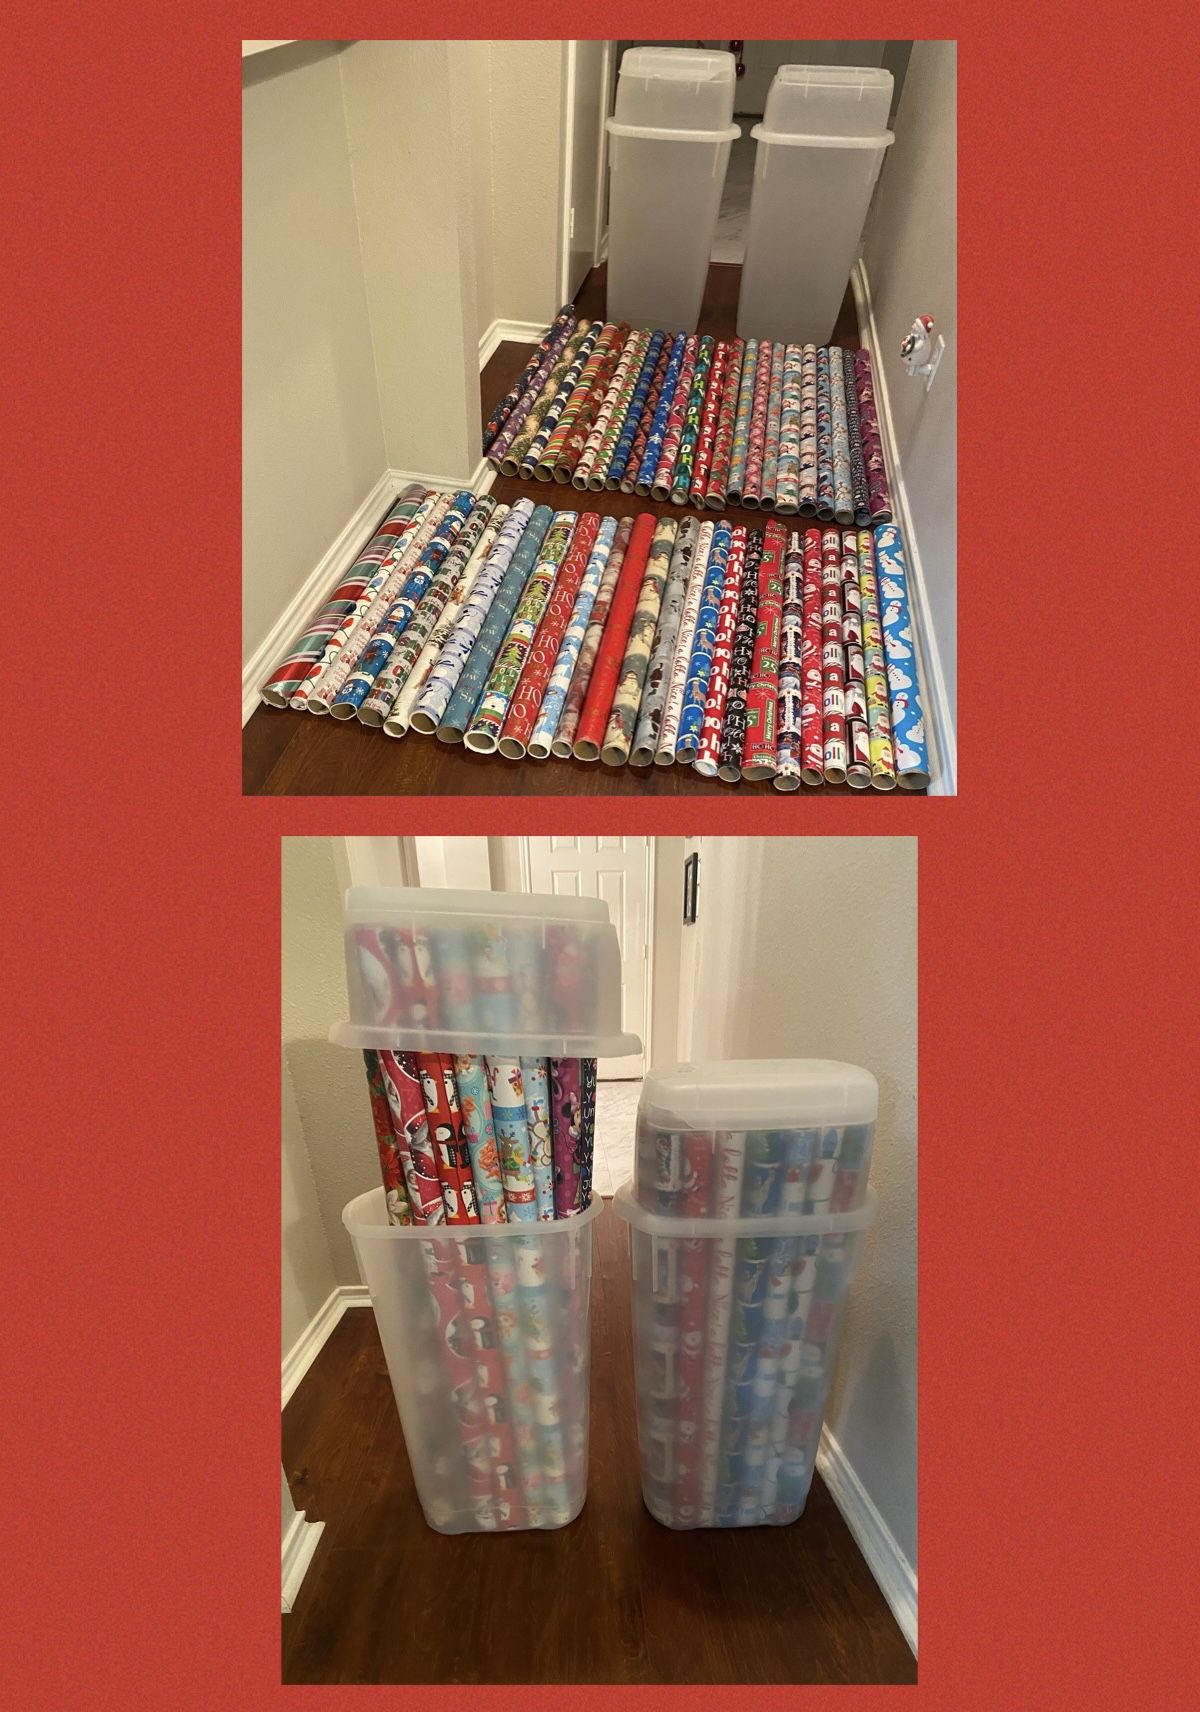 50 ROLLS OF CHRISTMAS WRAP & 2 WRAPPING PAPER STORAGE CONTAINERS - ALL FOR $45